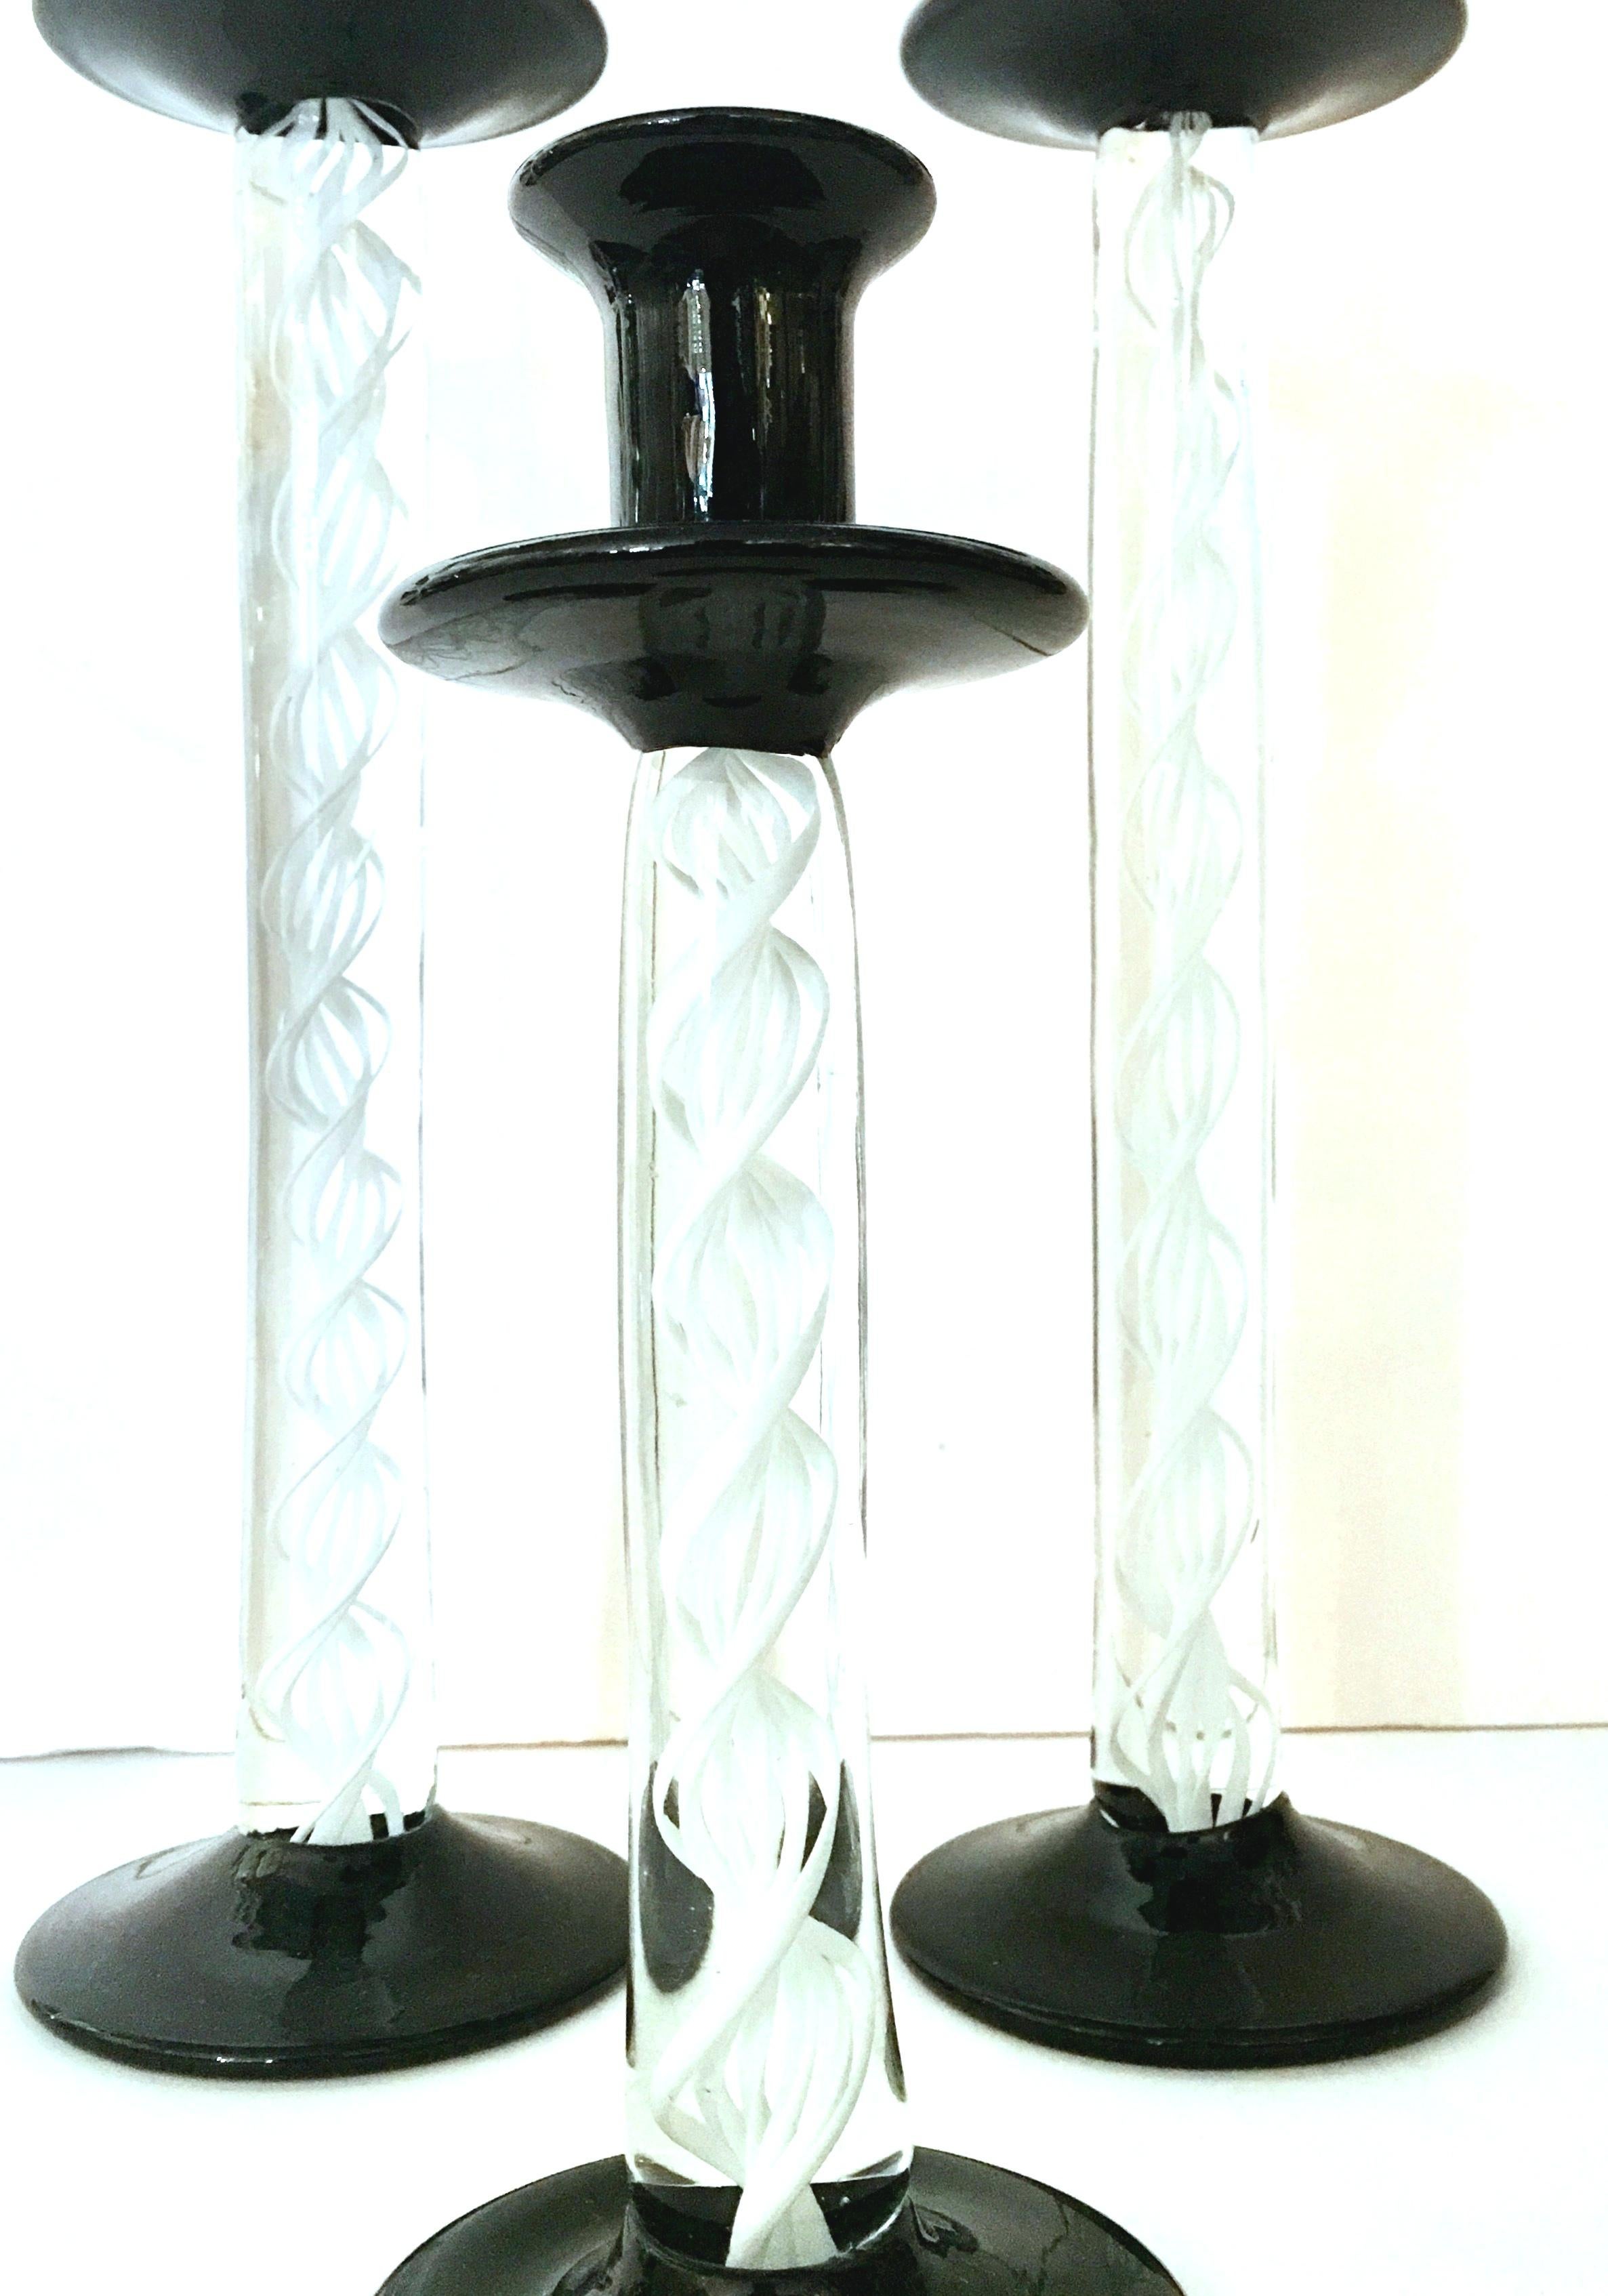 1980s Italian Murano glass candlesticks set of three pieces. Features a translucent body with white cased swirl detail and black foot and holder. Small candlestick measures, 9.5